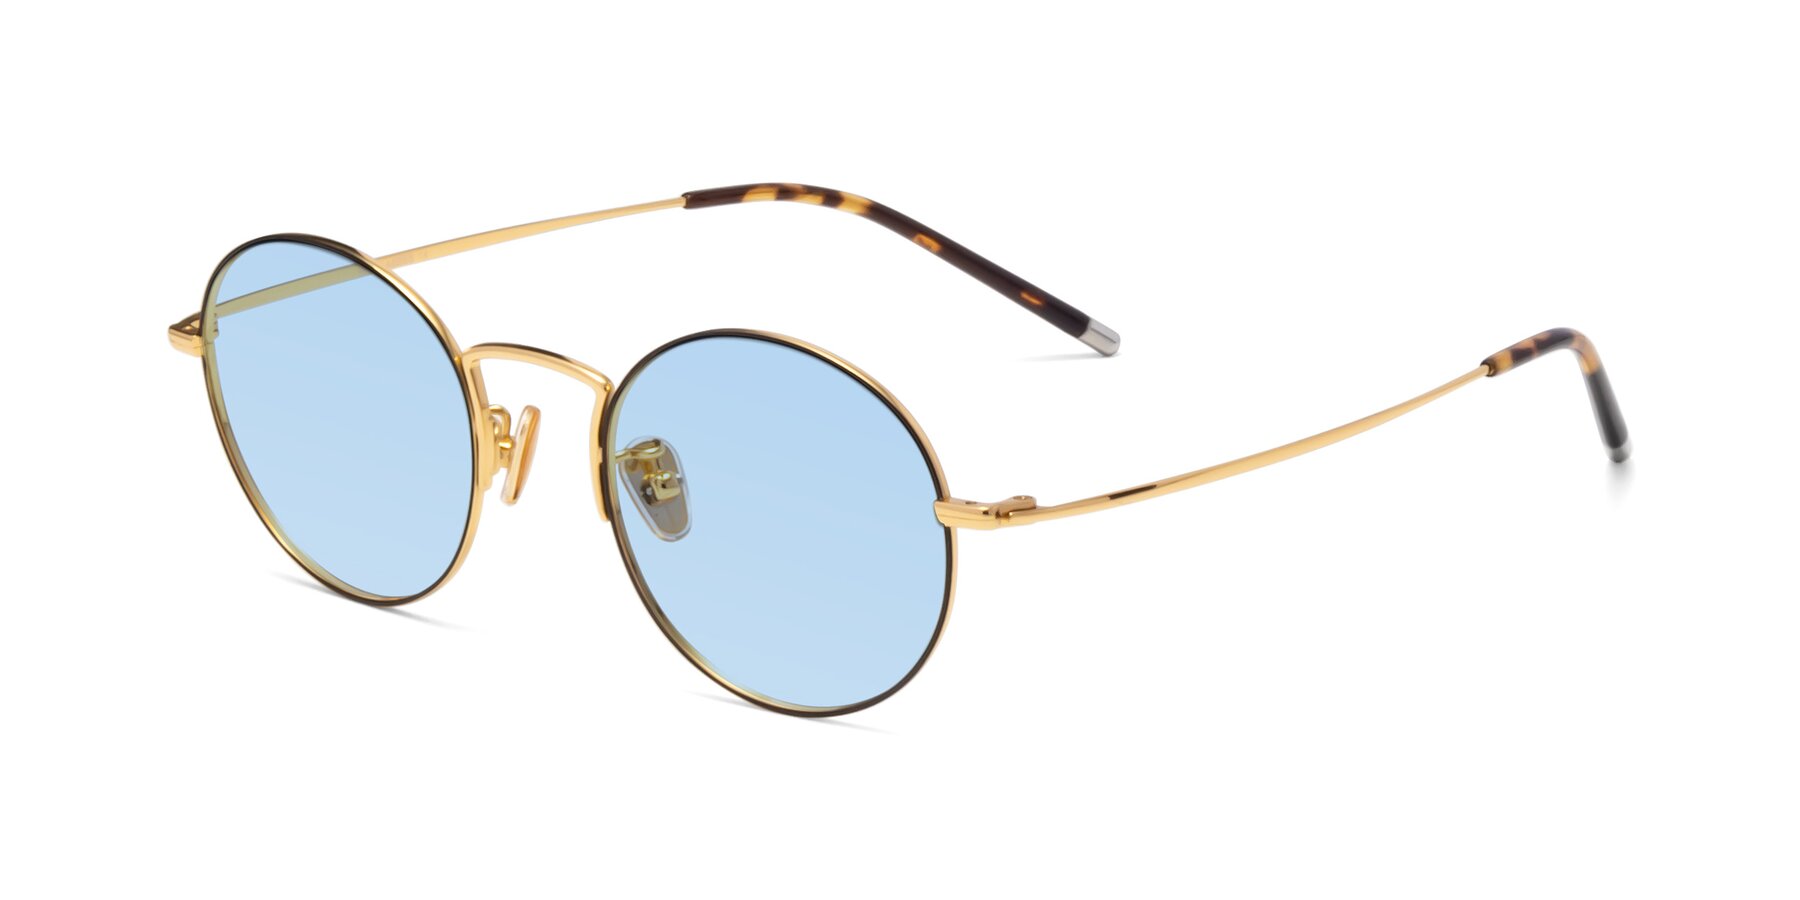 Angle of 80033 in Black-Gold with Light Blue Tinted Lenses